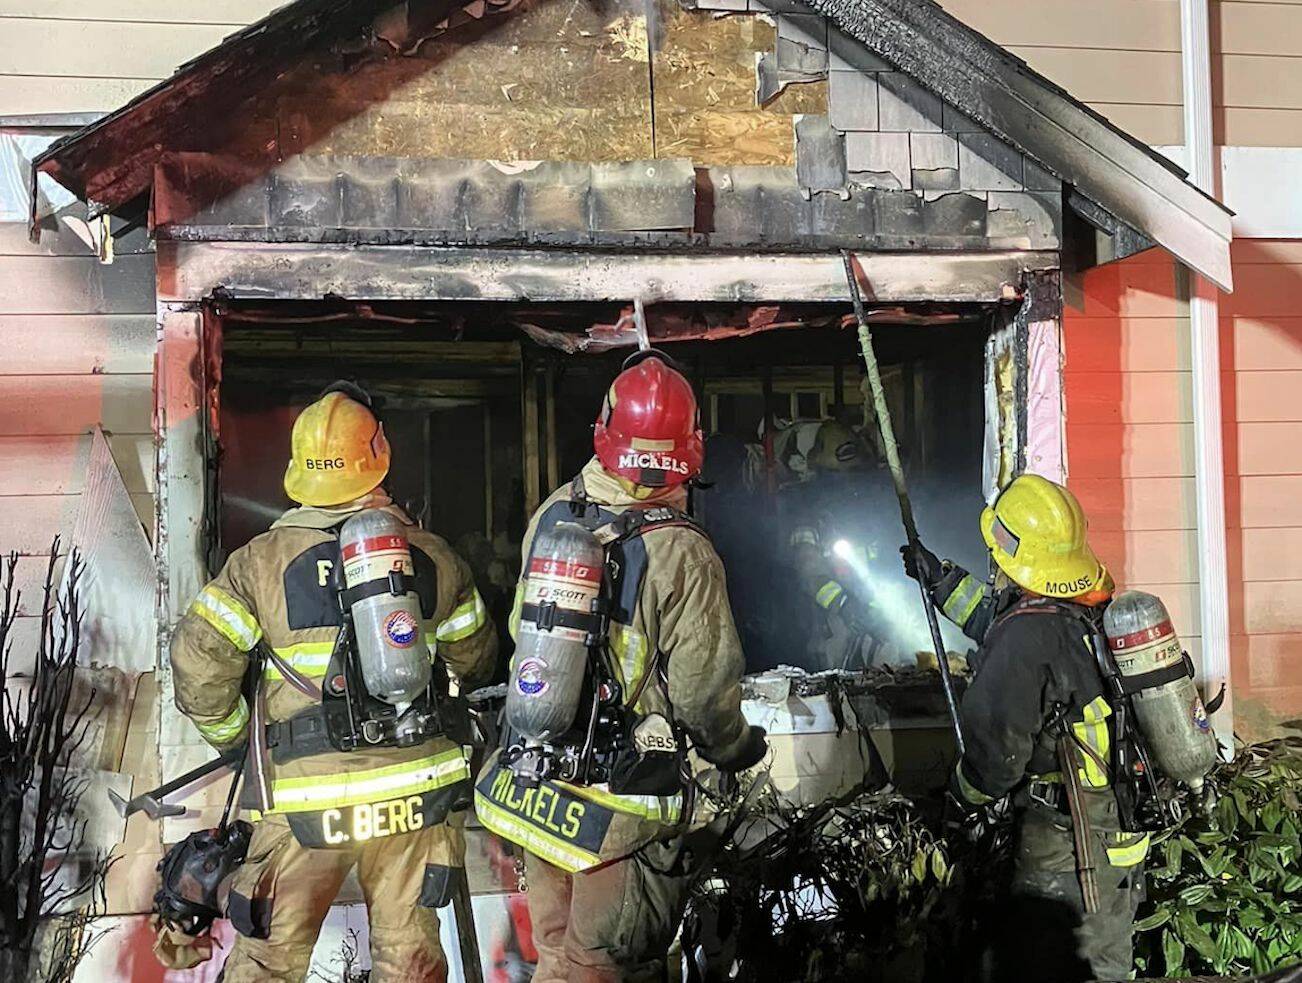 Snohomish Regional Fire and Rescue respond to a multi-unit structure fire in the early morning of Wednesday, Sept. 13, 2023, in Lake Stevens, Washington. (Photo provided by Snohomish Regional Fire & Rescue)